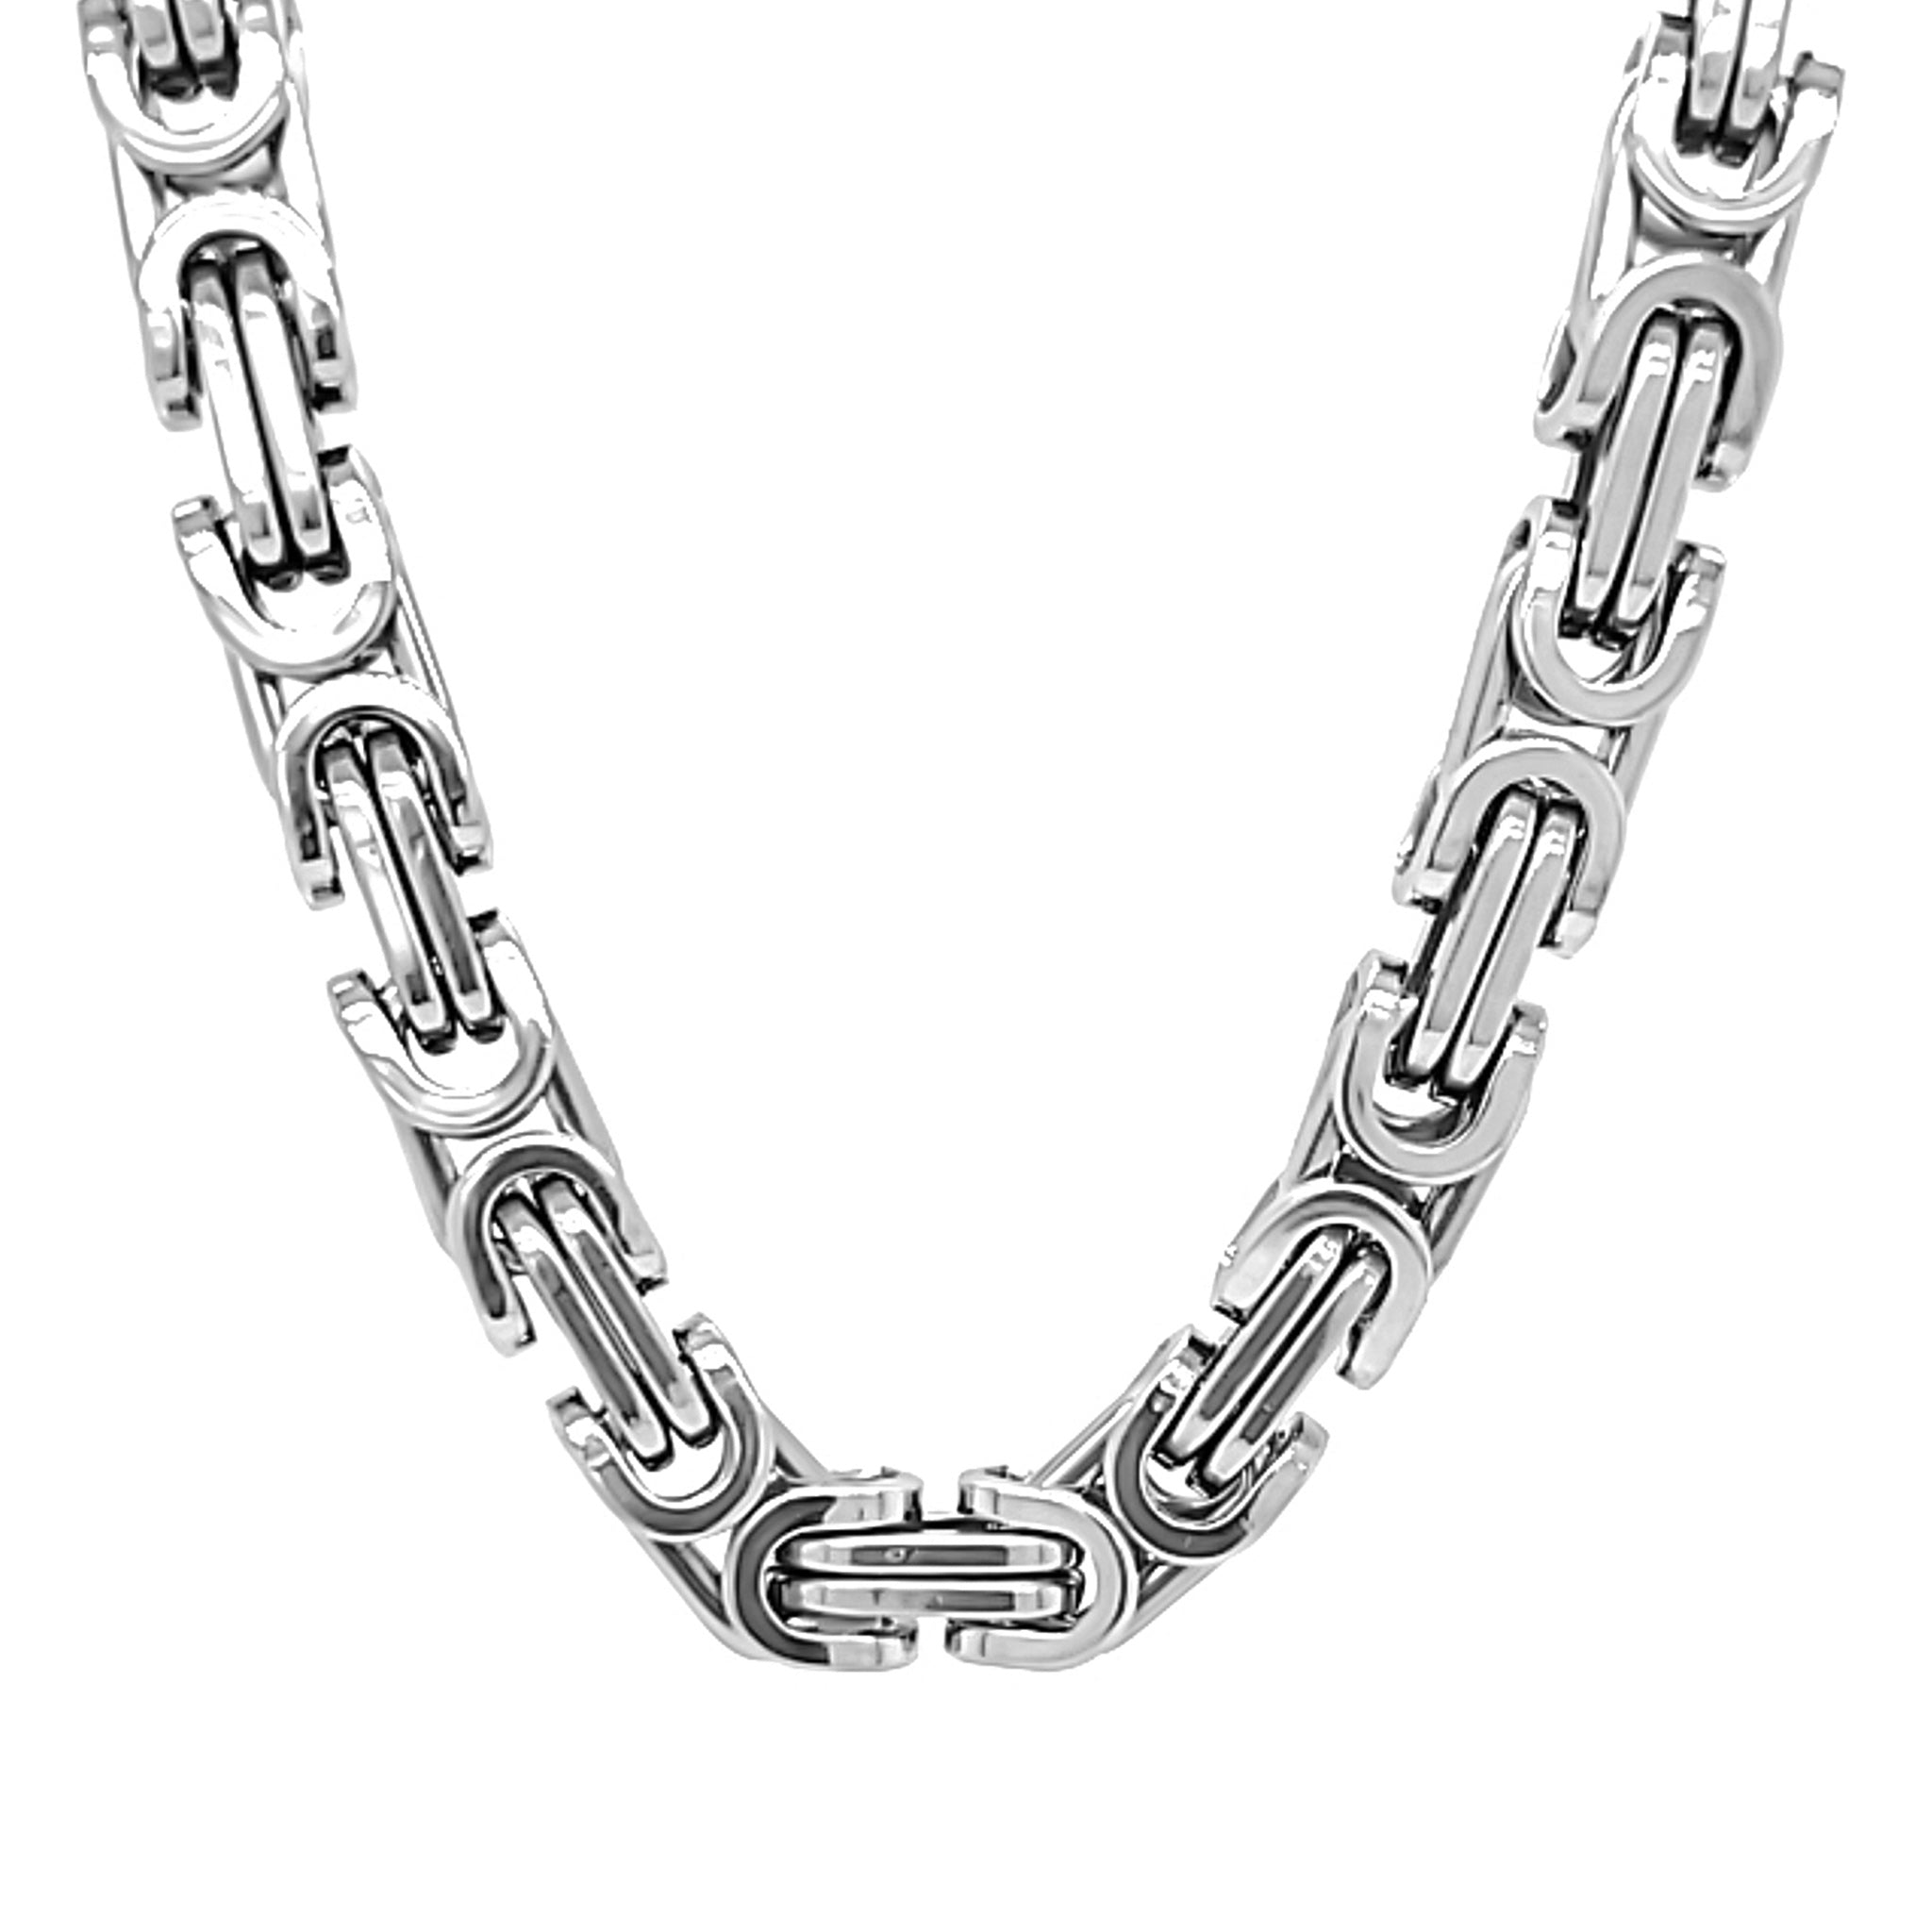 Stainless Steel Byzantine Chain Necklace Chn8500 | Wholesale Jewelry Website